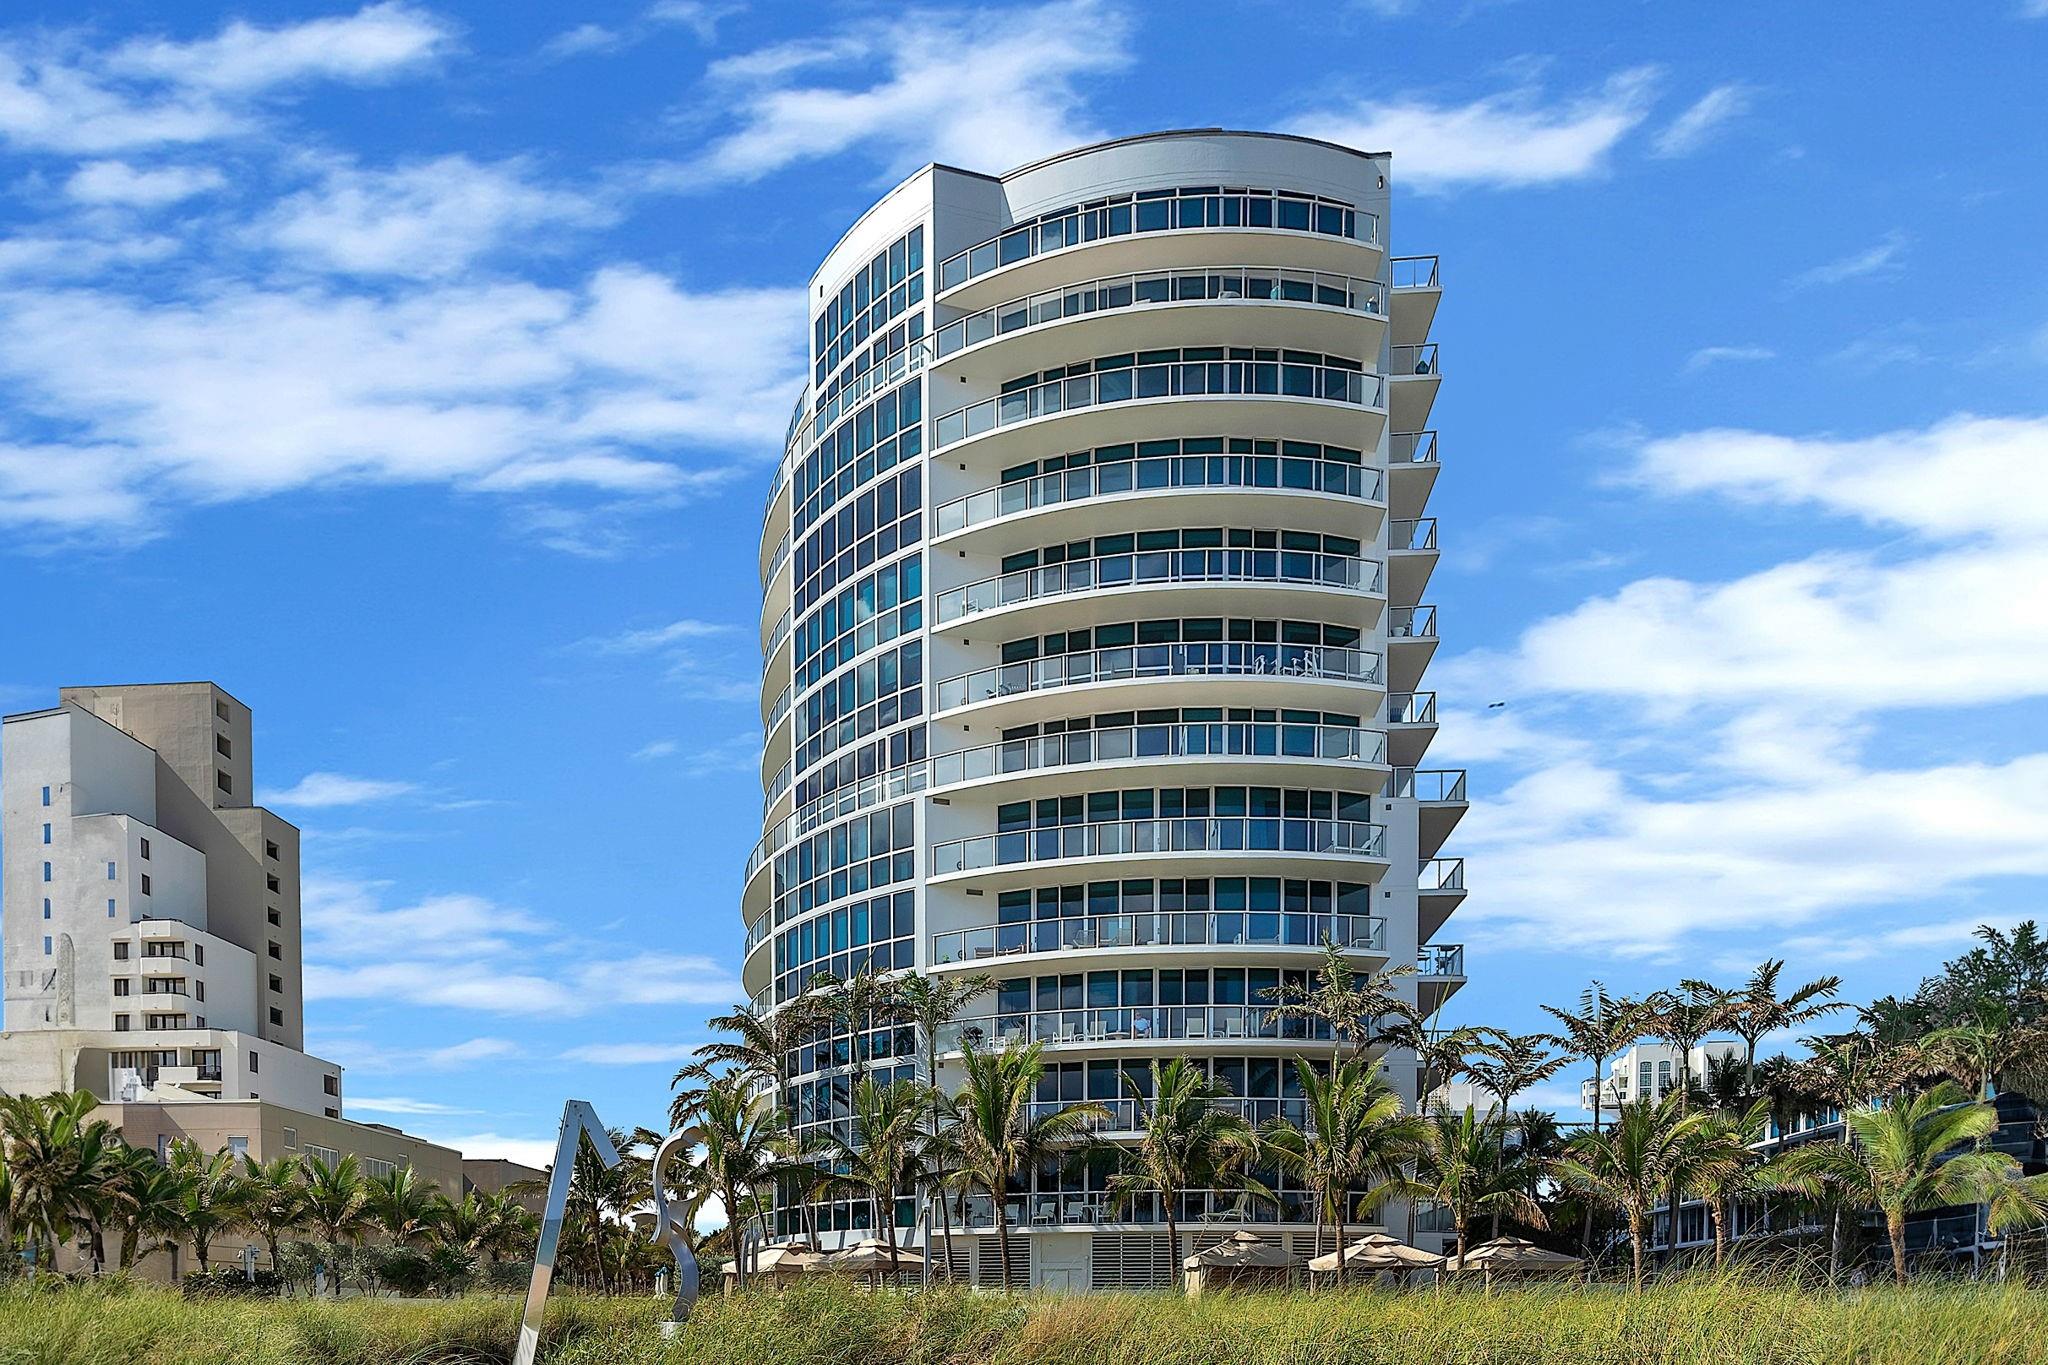 Owners and investors are welcome! Elegant partially furnished unit with amazing ocean and city views from floor to ceiling windows. Oversize wraparound balcony to enjoy watching sunrise and sunset. Boutique building with only 64 units. Unit can be rented right away. Excellent amenities: 24 hours concierge, valet, heated infinity pool, hot tub, cabanas, electric grill, exercise room, movie theater room, service on the beach. There is an additional storage room, car wash area, electric car charger.  Walking distance to Las Olas and Fort Lauderdale Beach Blvd for all entertainments.